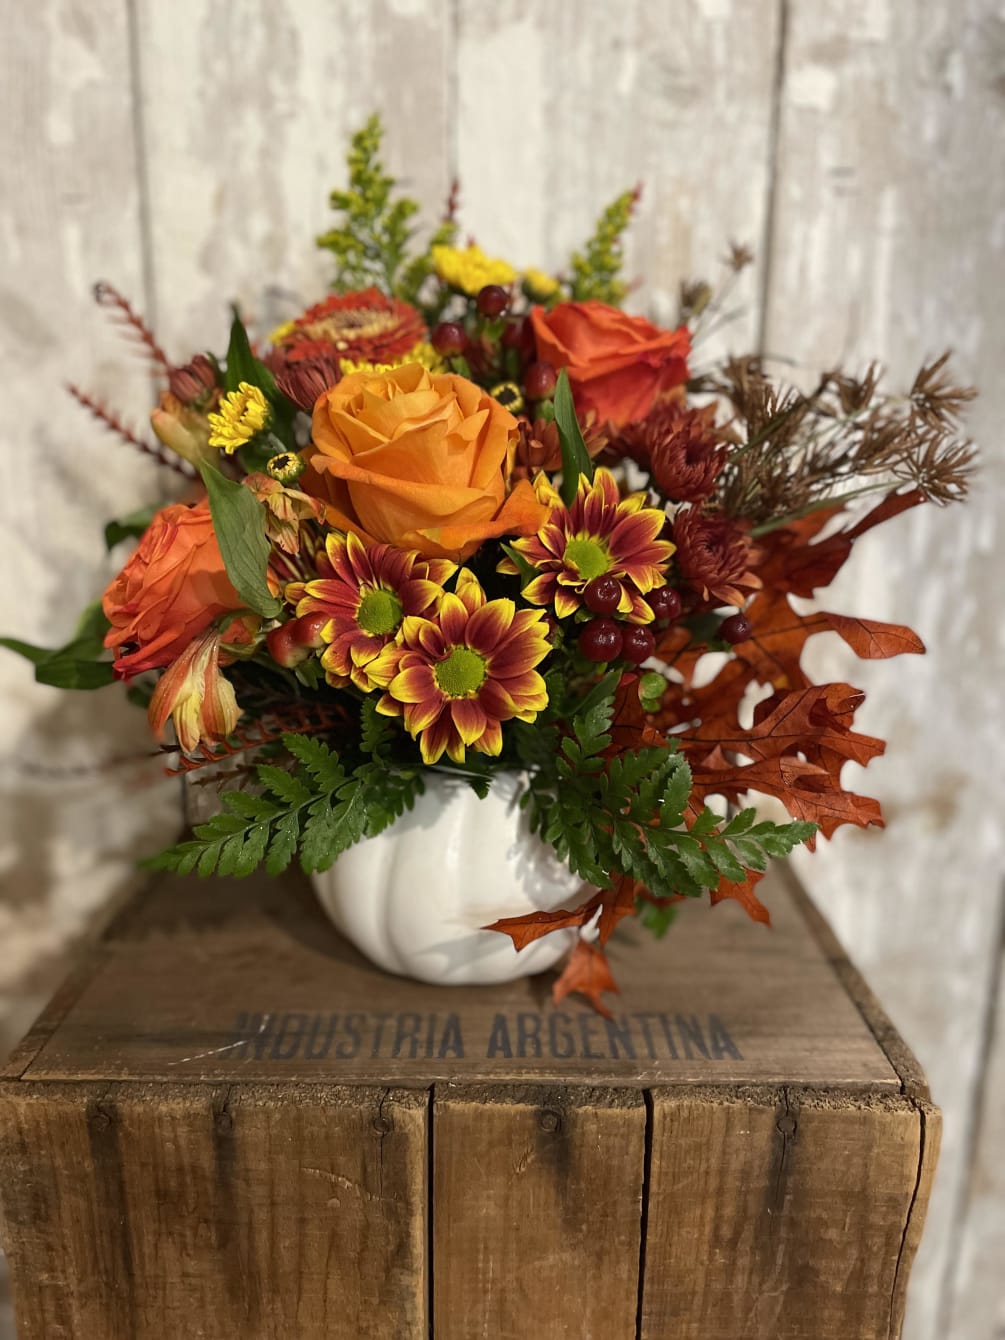 This adorable pumpkin arrangement will be a hit for any fall holiday!